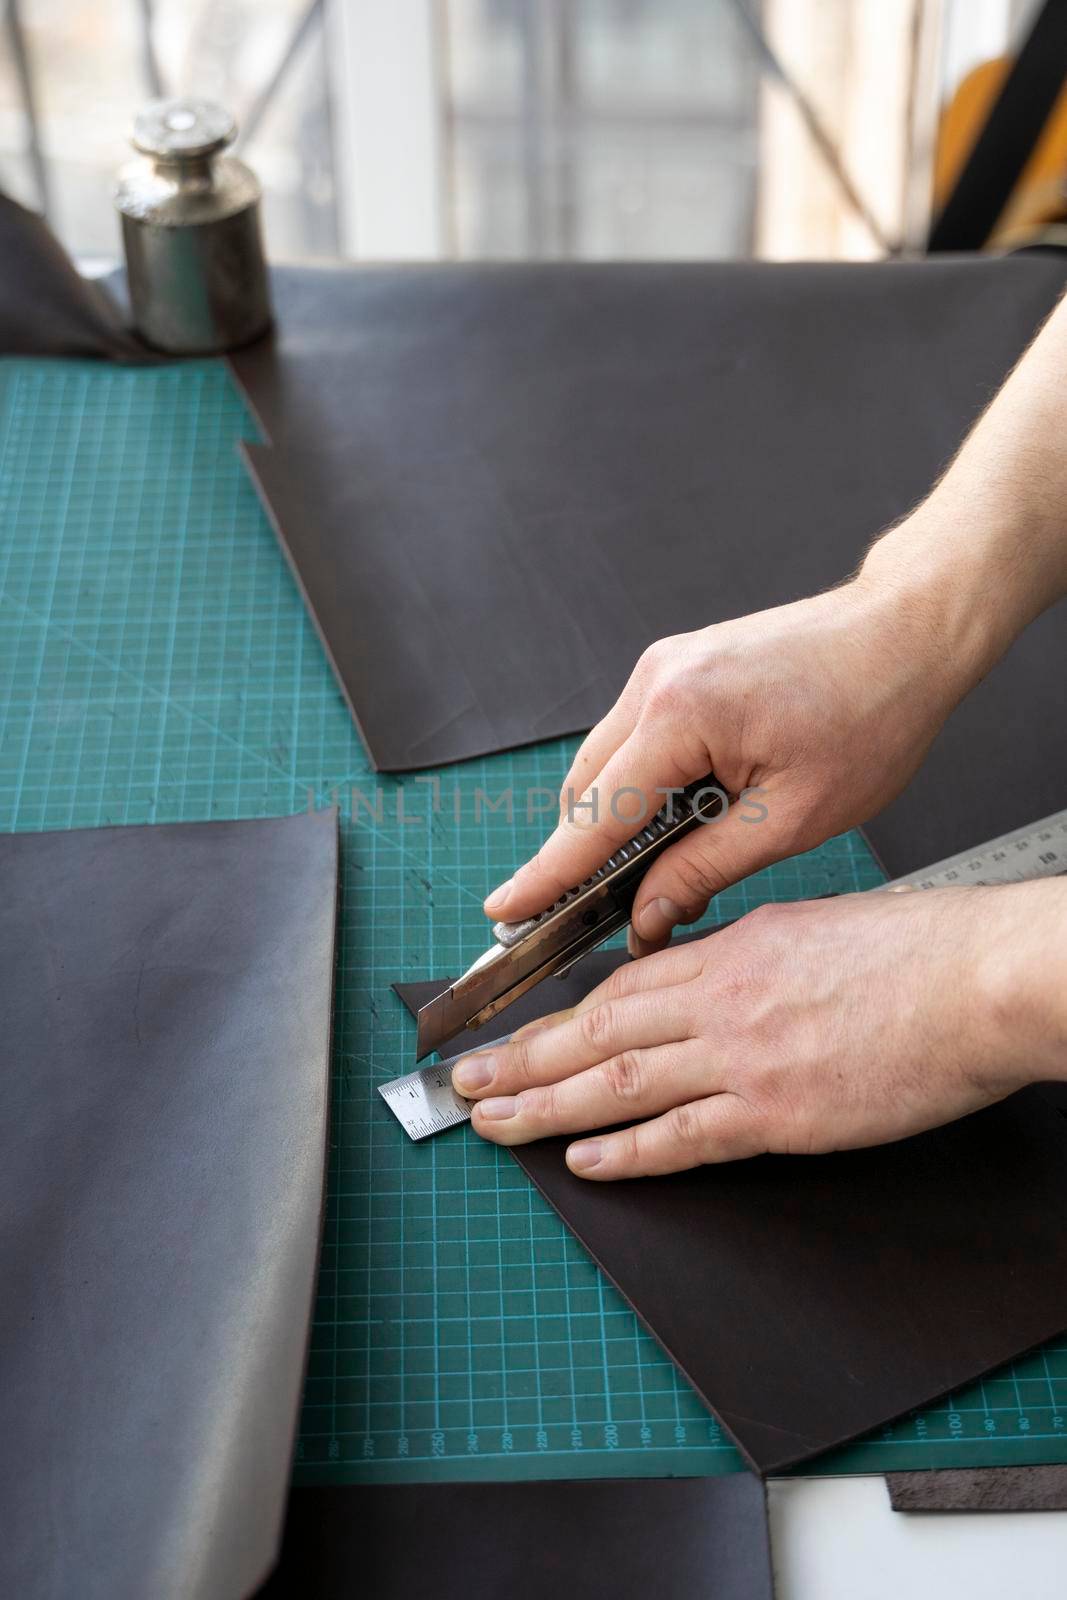 Men's hand holding a stationery knife and metal ruler and cutting on a pieces for a leather wallet in his workshop. Working process with a brown natural leather. Craftsman holding a crafting tools